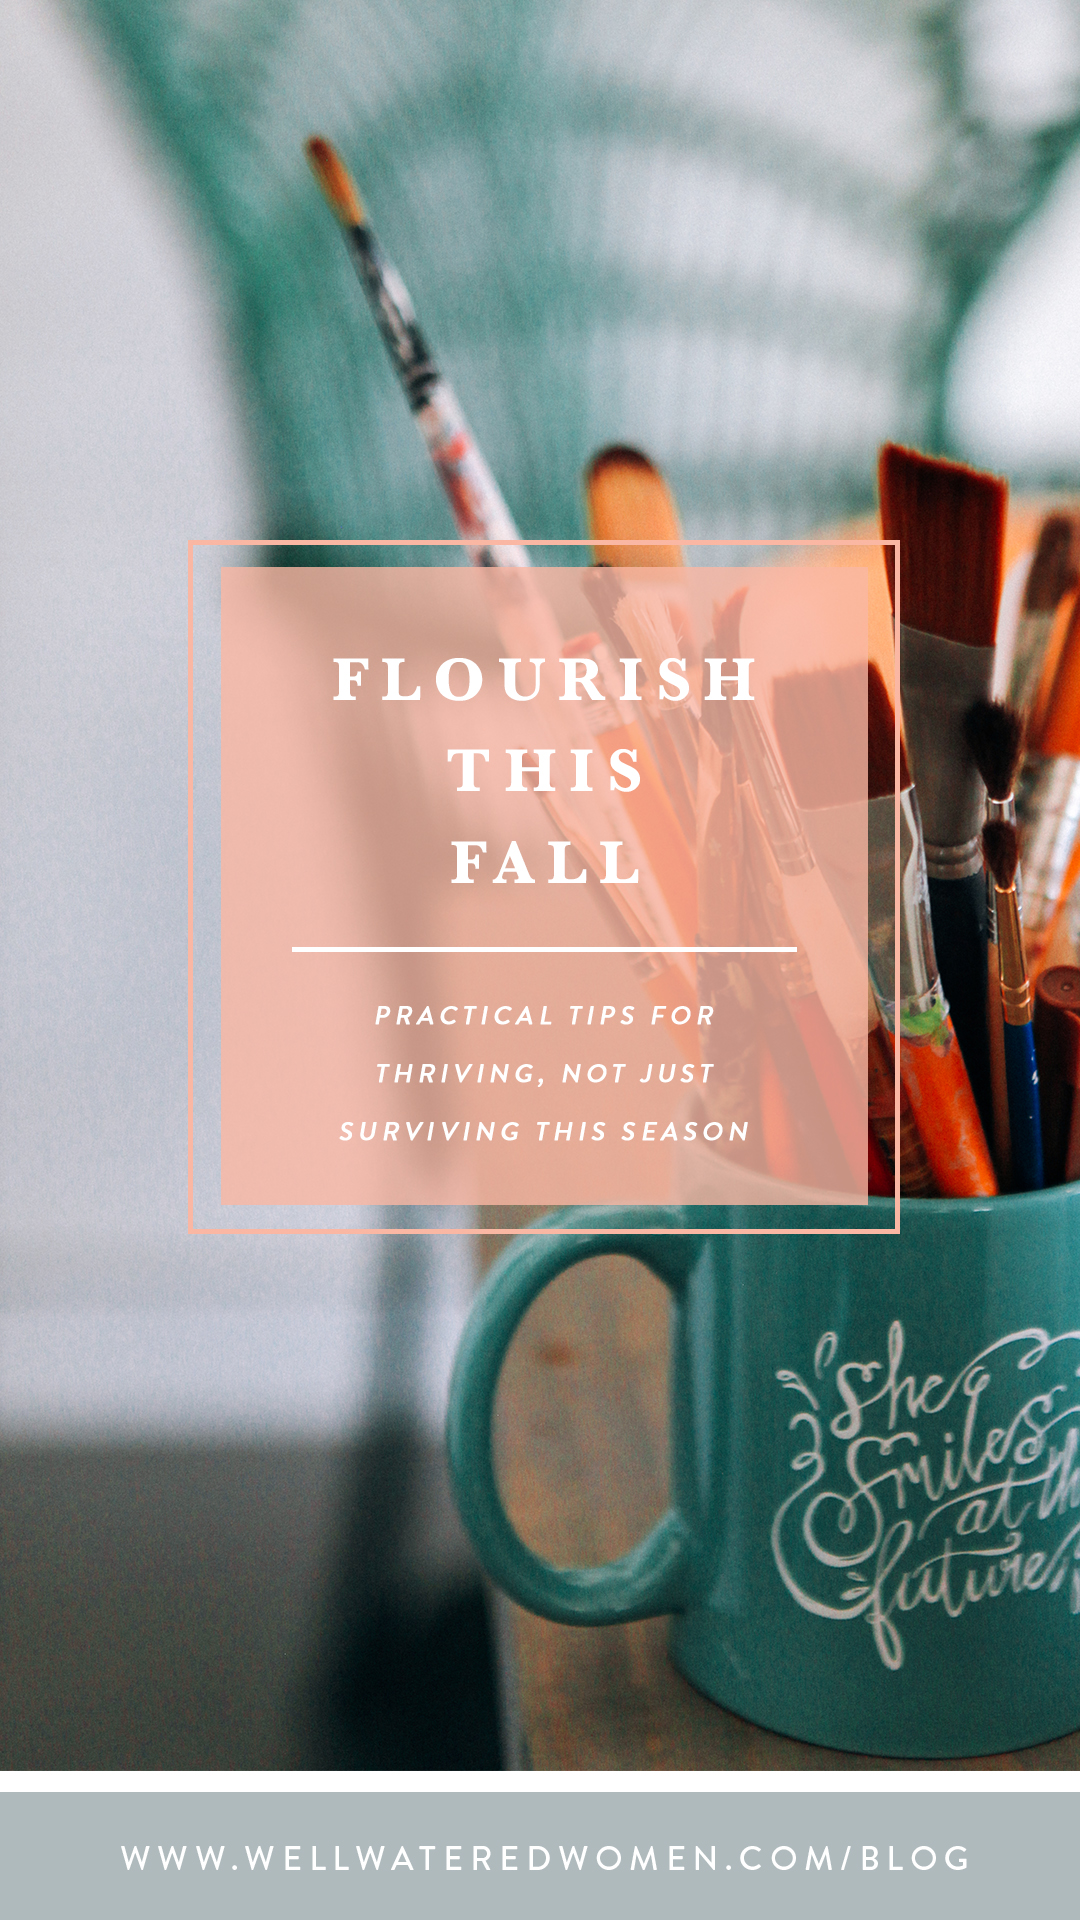 How to Flourish This Fall: Practical tips for thriving, not surviving as a Christian Woman